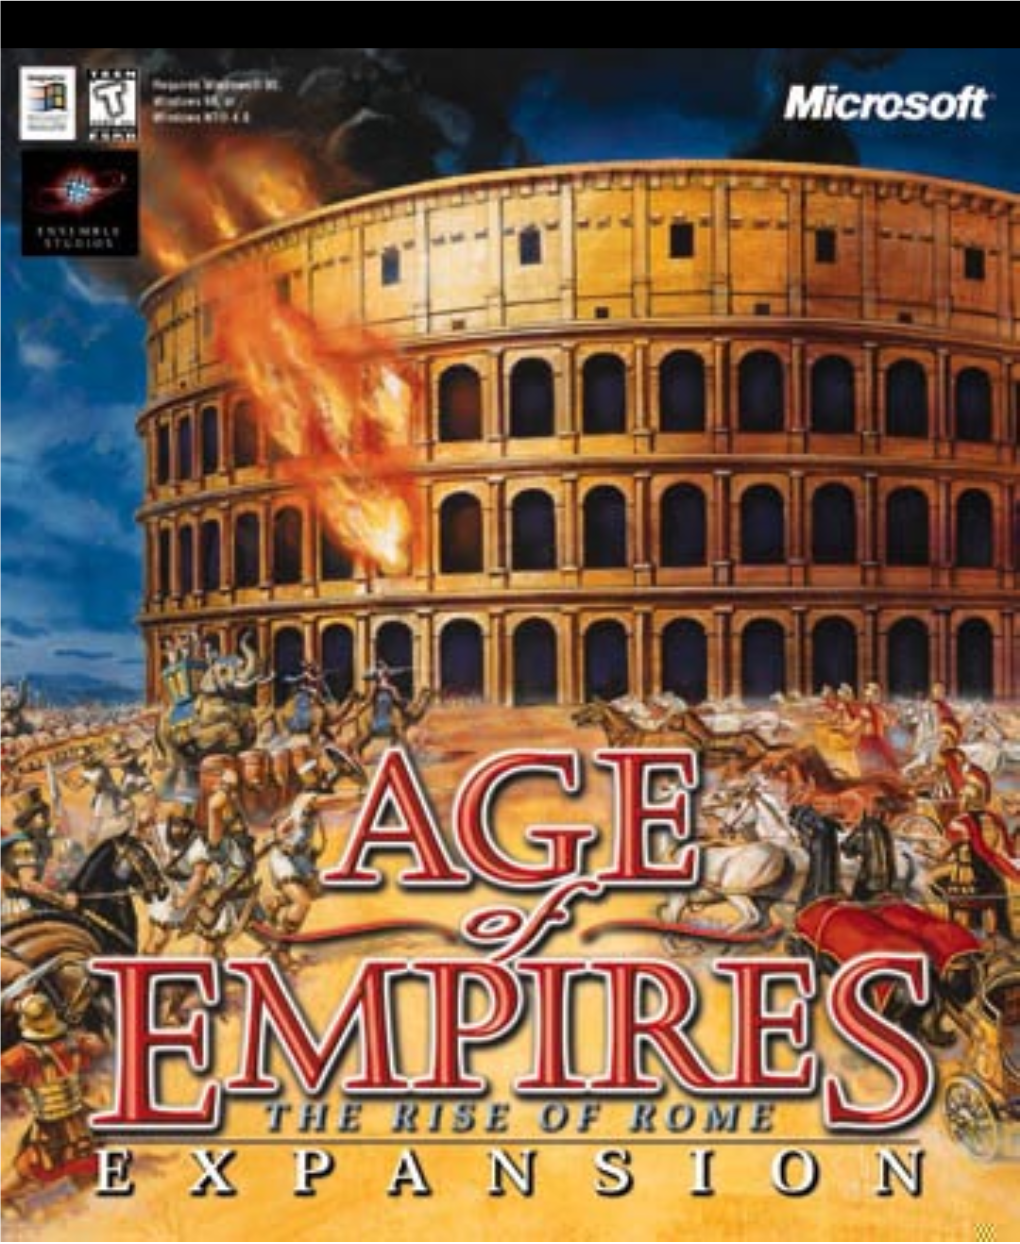 Age of Empires Expansion Includes These New Features: • Four New Civilizations: Carthaginian, Macedonian, Palmyran, and Roman